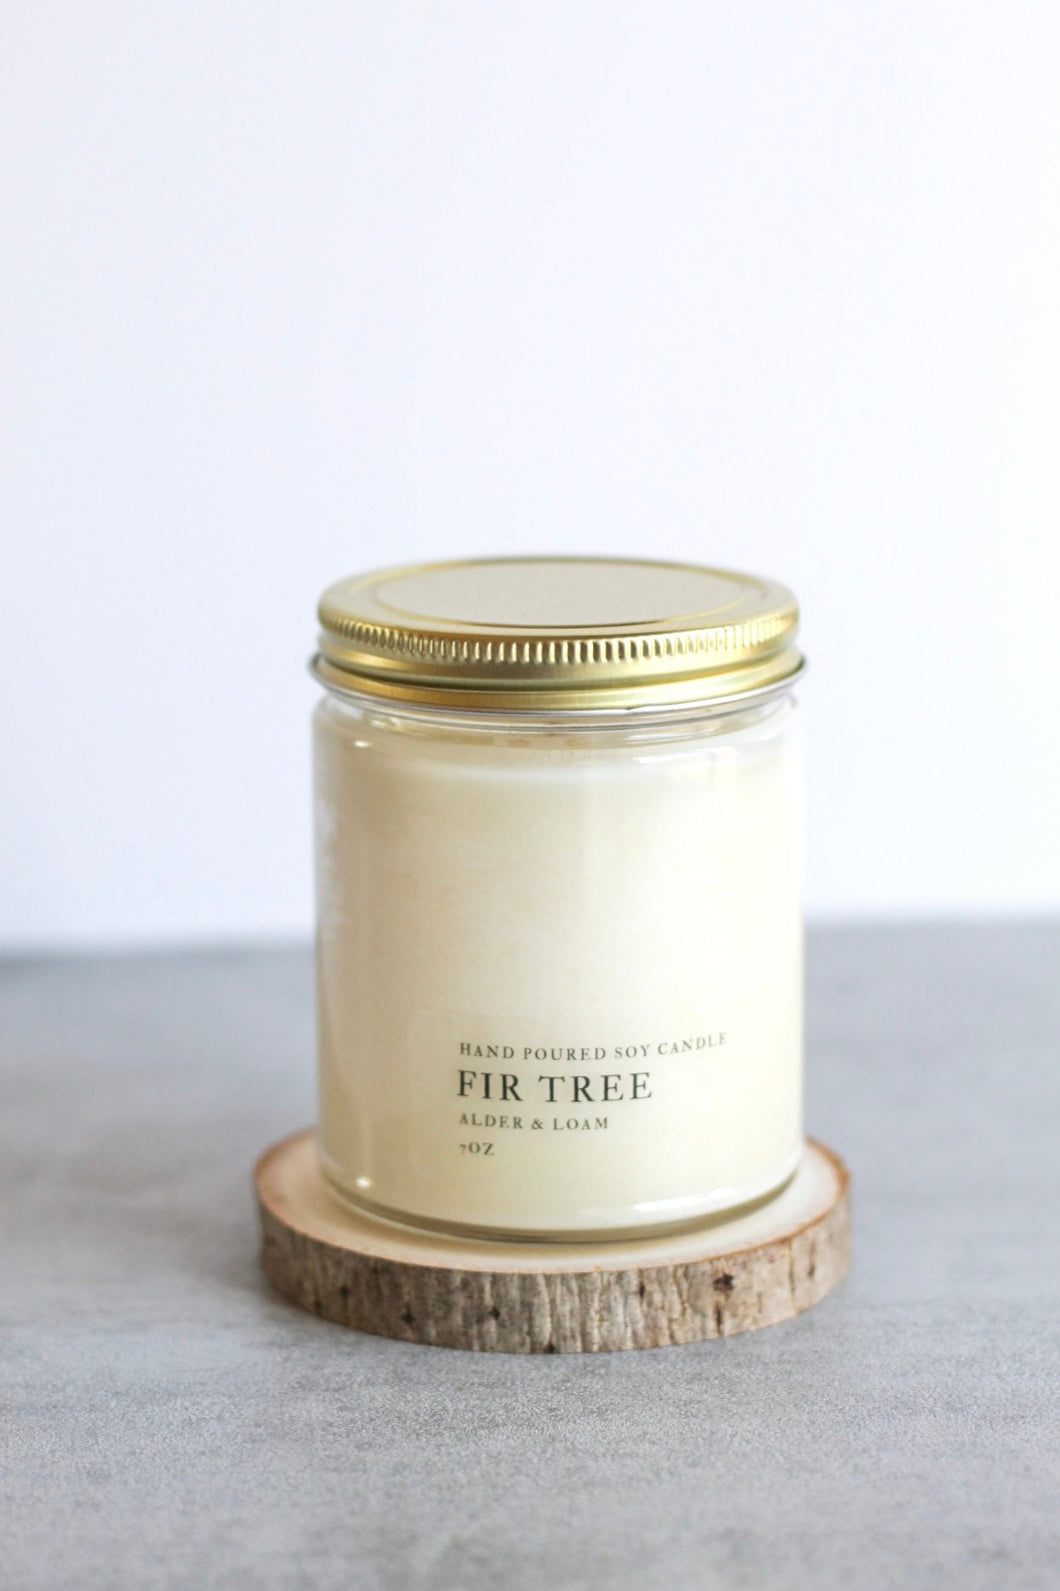 Fir Tree Soy Candle, Hand Poured, Natural, Eco Friendly, Earthy Scent, Christmas Candle, 7 oz Jar